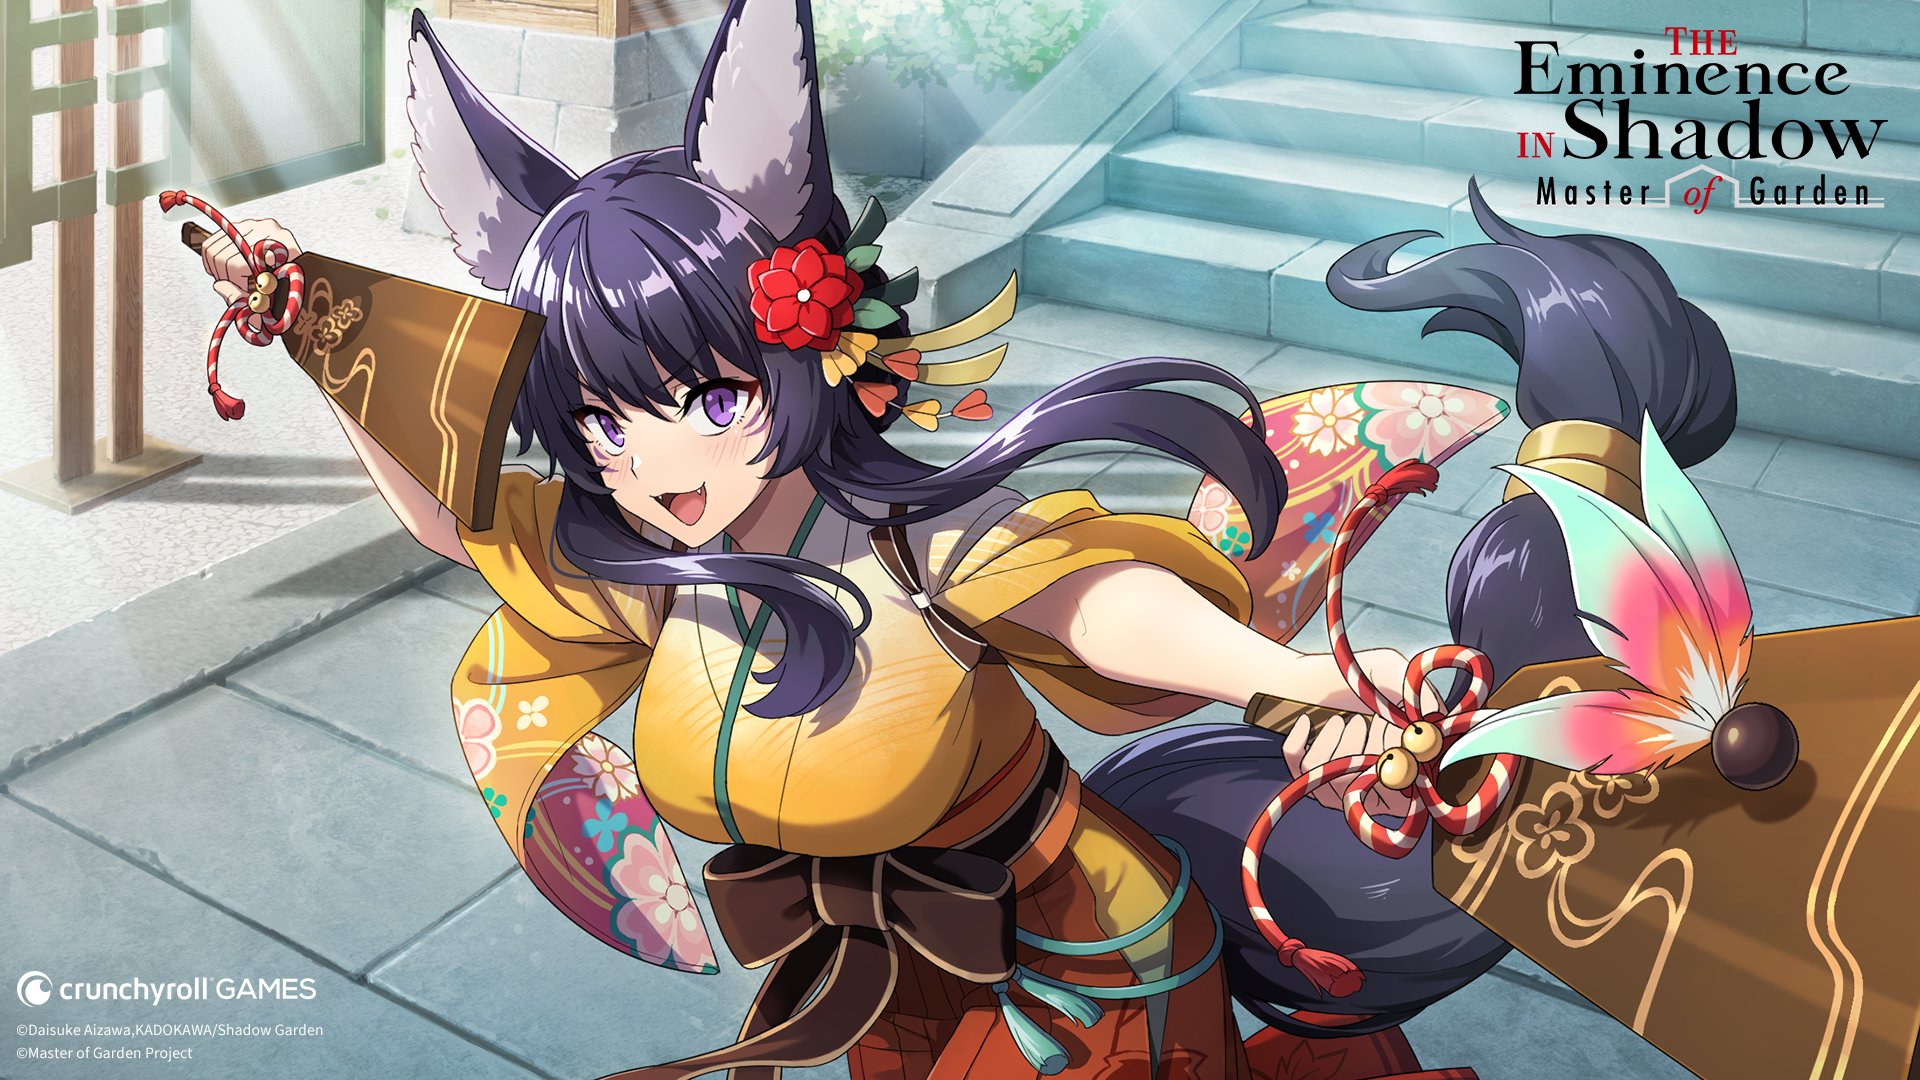 Crunchyroll Games on X: Way of The Beast Delta is now available for a  limited time in The Eminence in Shadow: Master of Garden! 🎍🎆 (via  @Emishadow_rpg)  / X